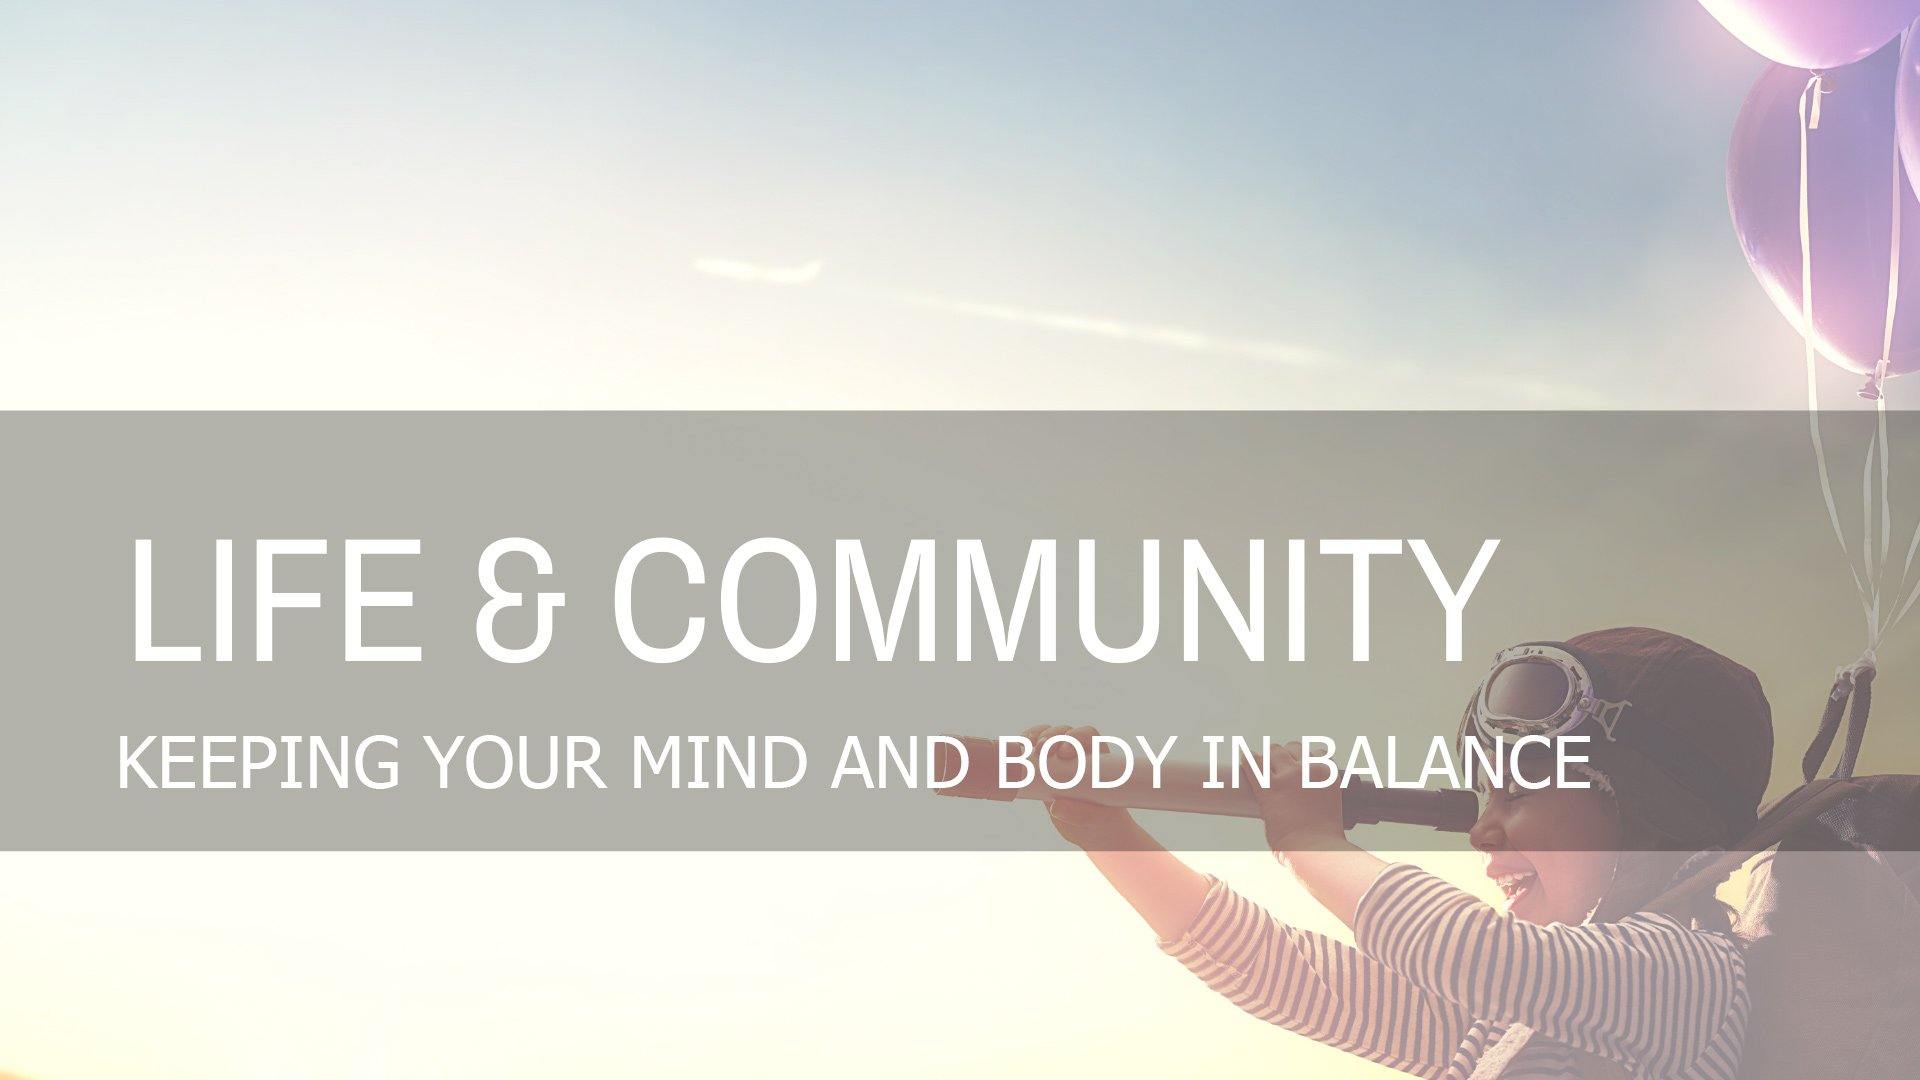 How to Ensure You Keep Your Body and Mind in Balance